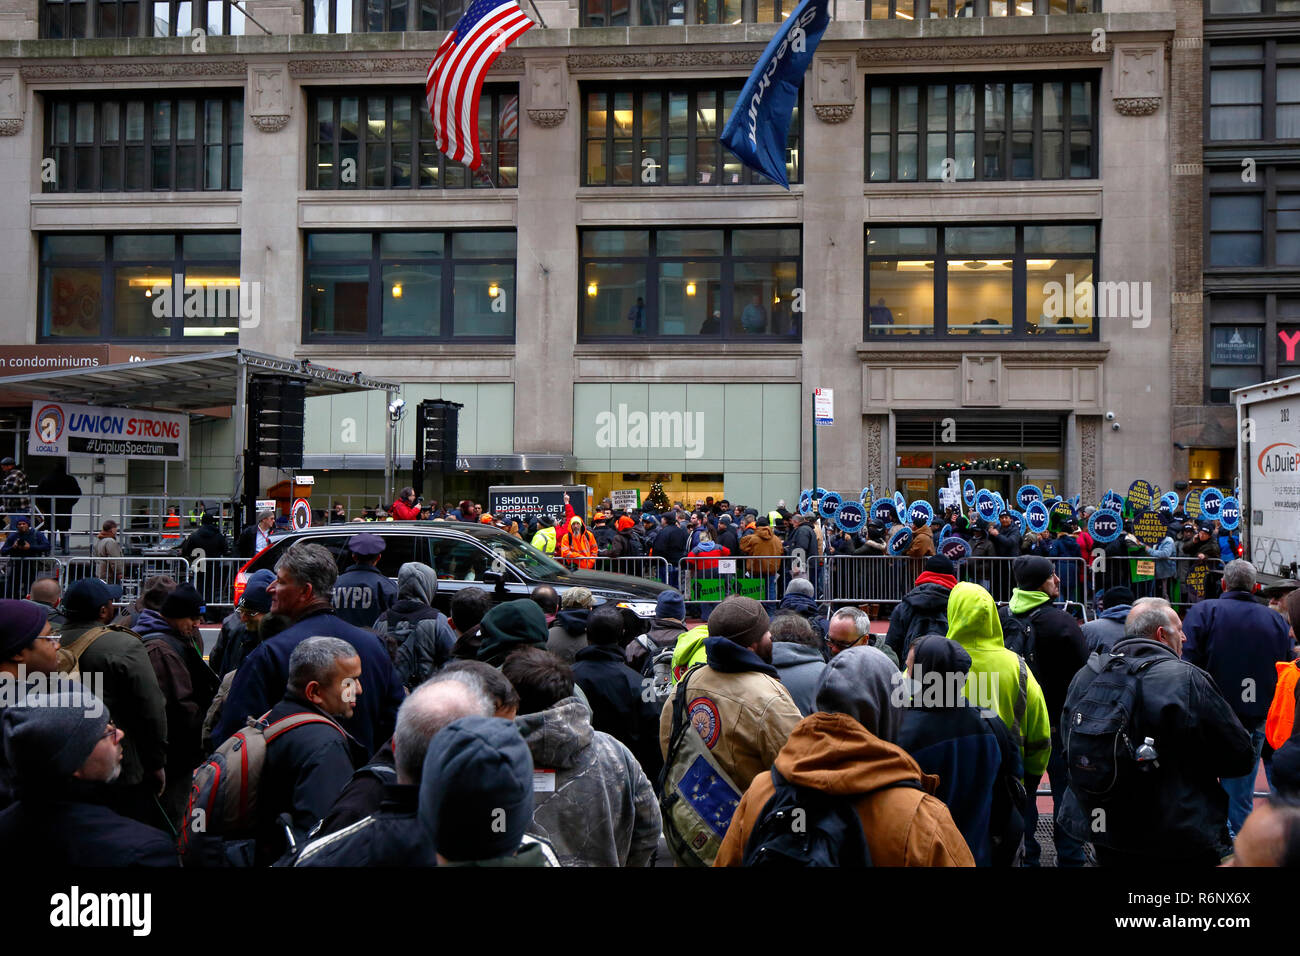 A union labor rally held outside Charter Spectrum's offices denouncing their union busting, and deceptive business practices, New York, NY Dec 5, 2018 Stock Photo